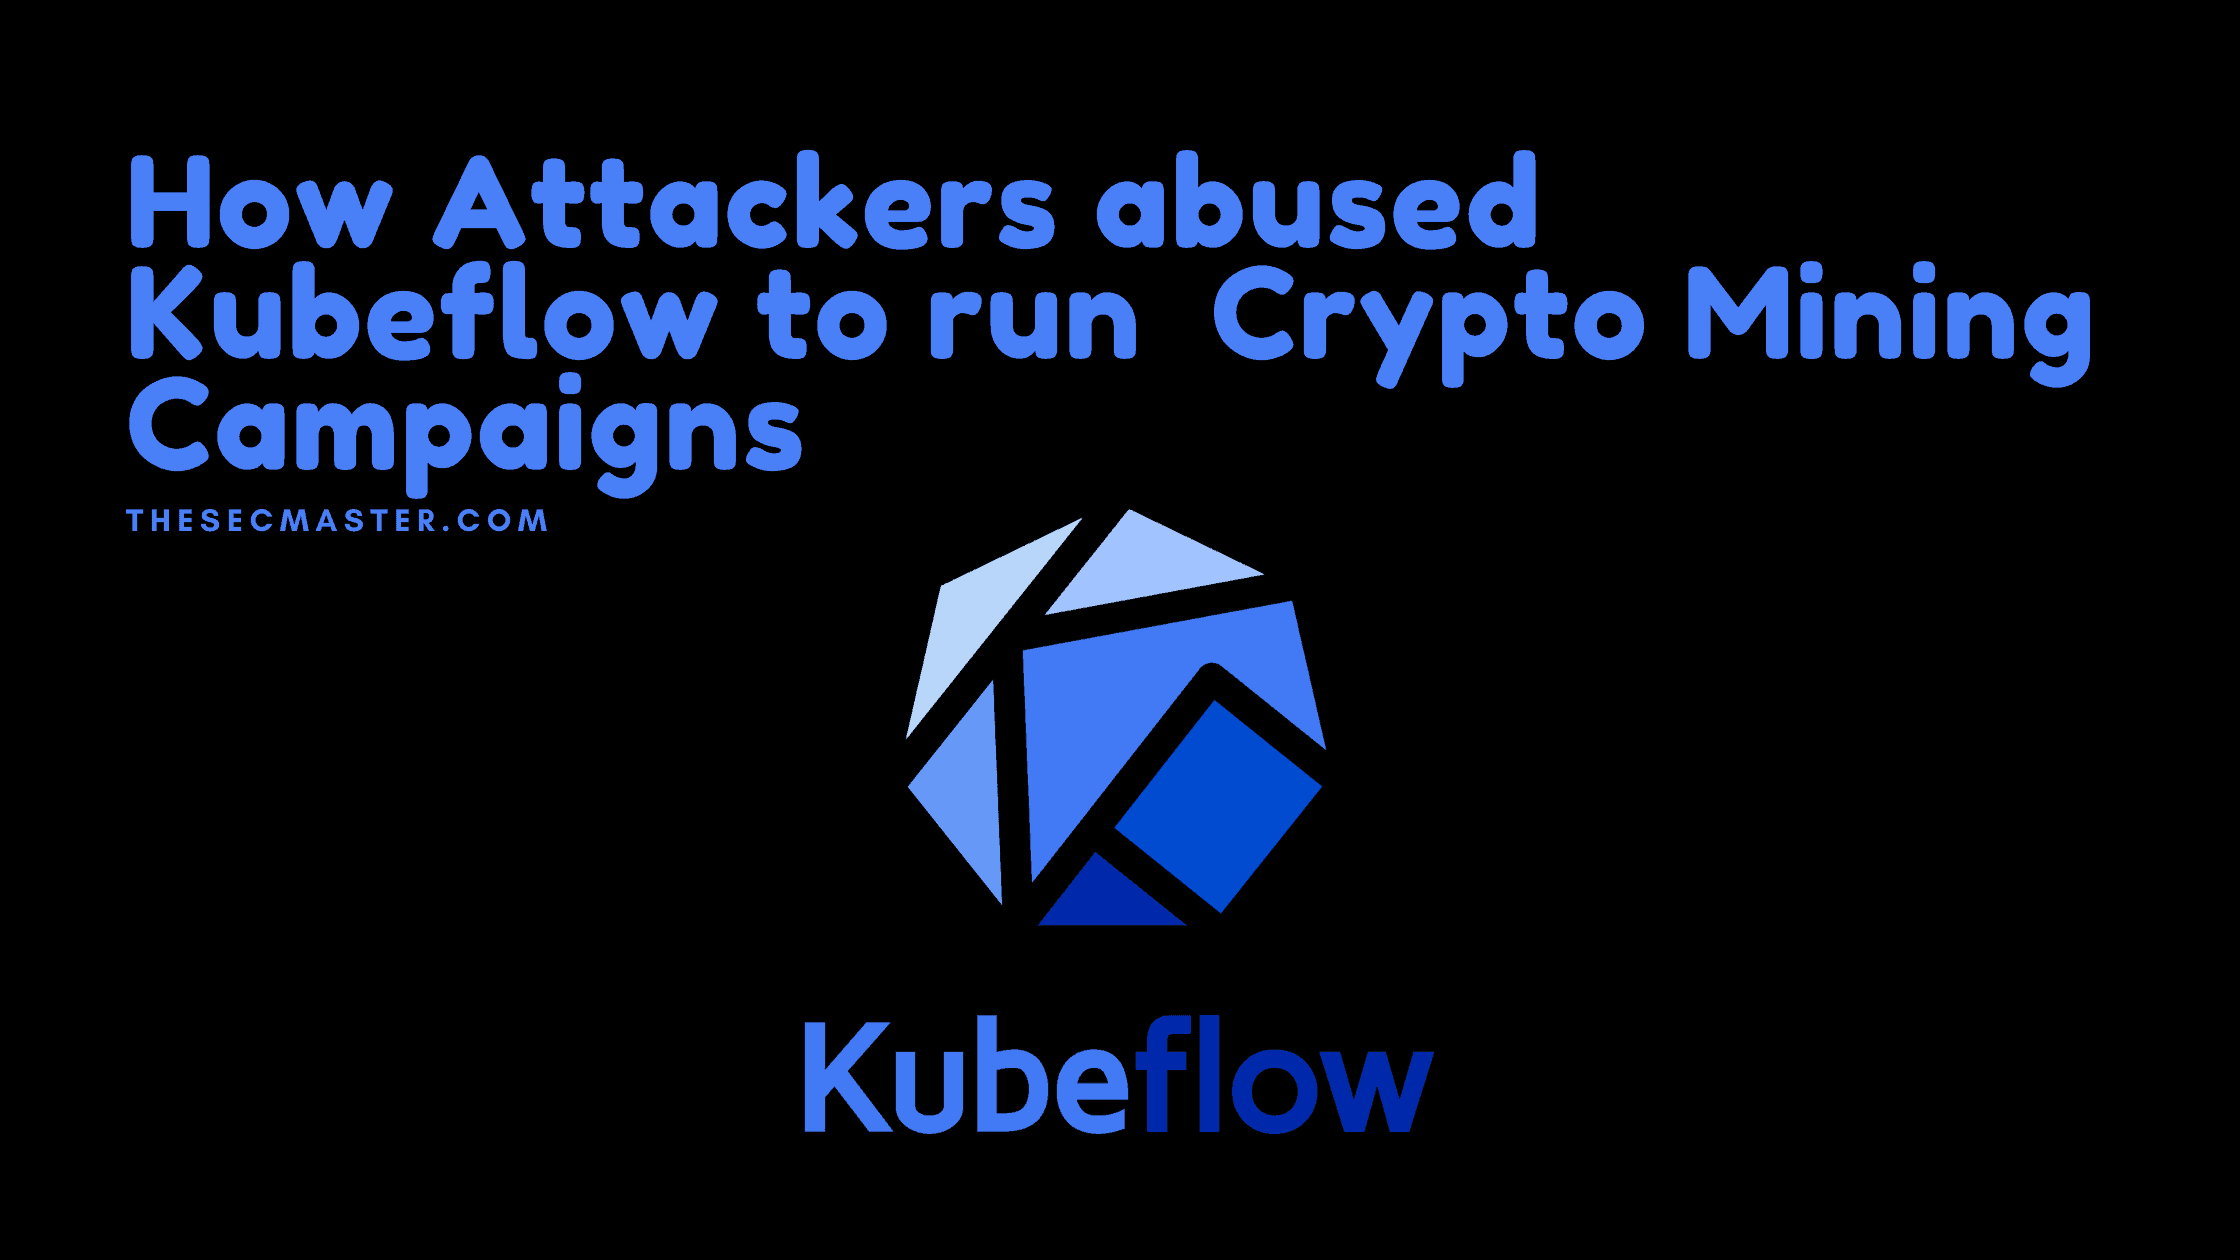 How Attackers Abused Kubeflow To Run Crypto Mining Campaigns